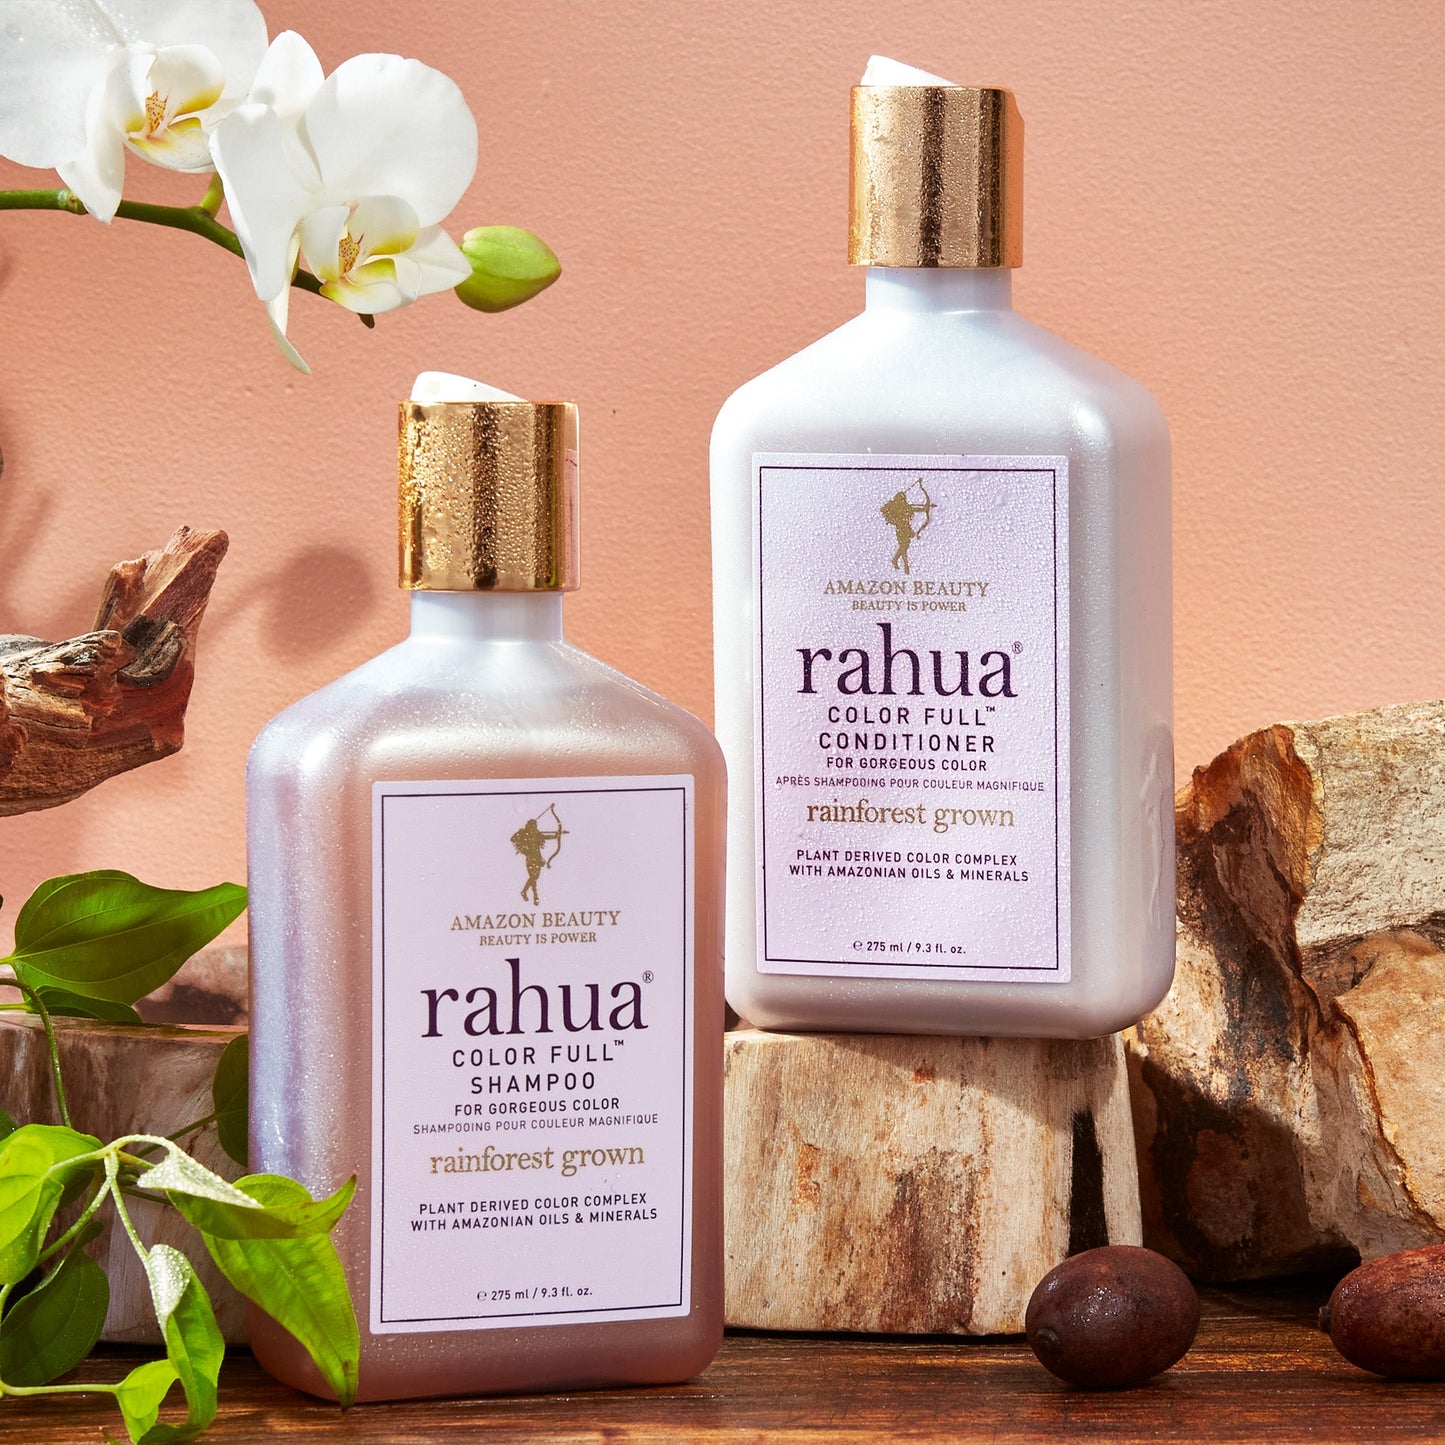 Rahua color full shampoo and conditioner with rahua seeds, gardenia flower placed on wooden block